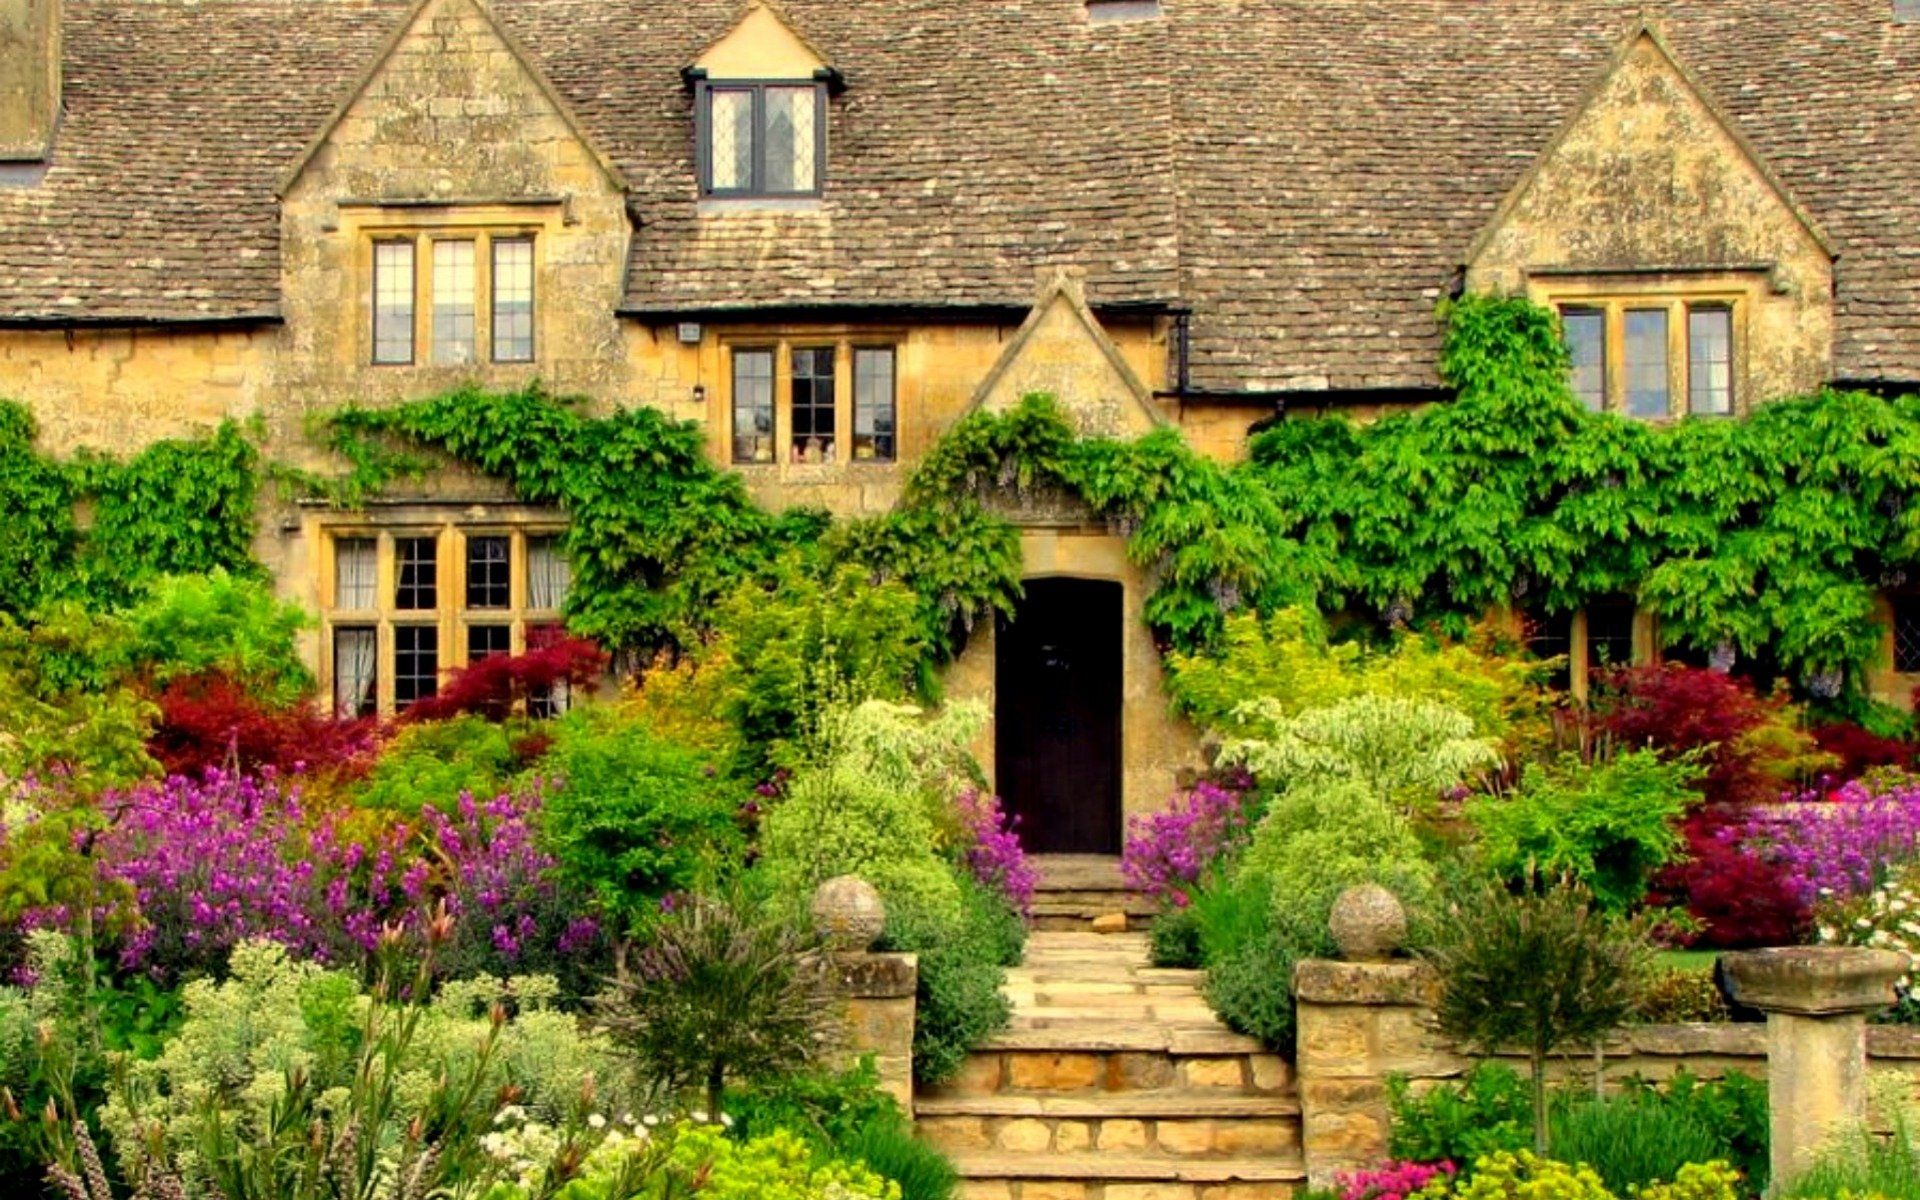 House in England at Springtime HD Wallpaper. Background Image